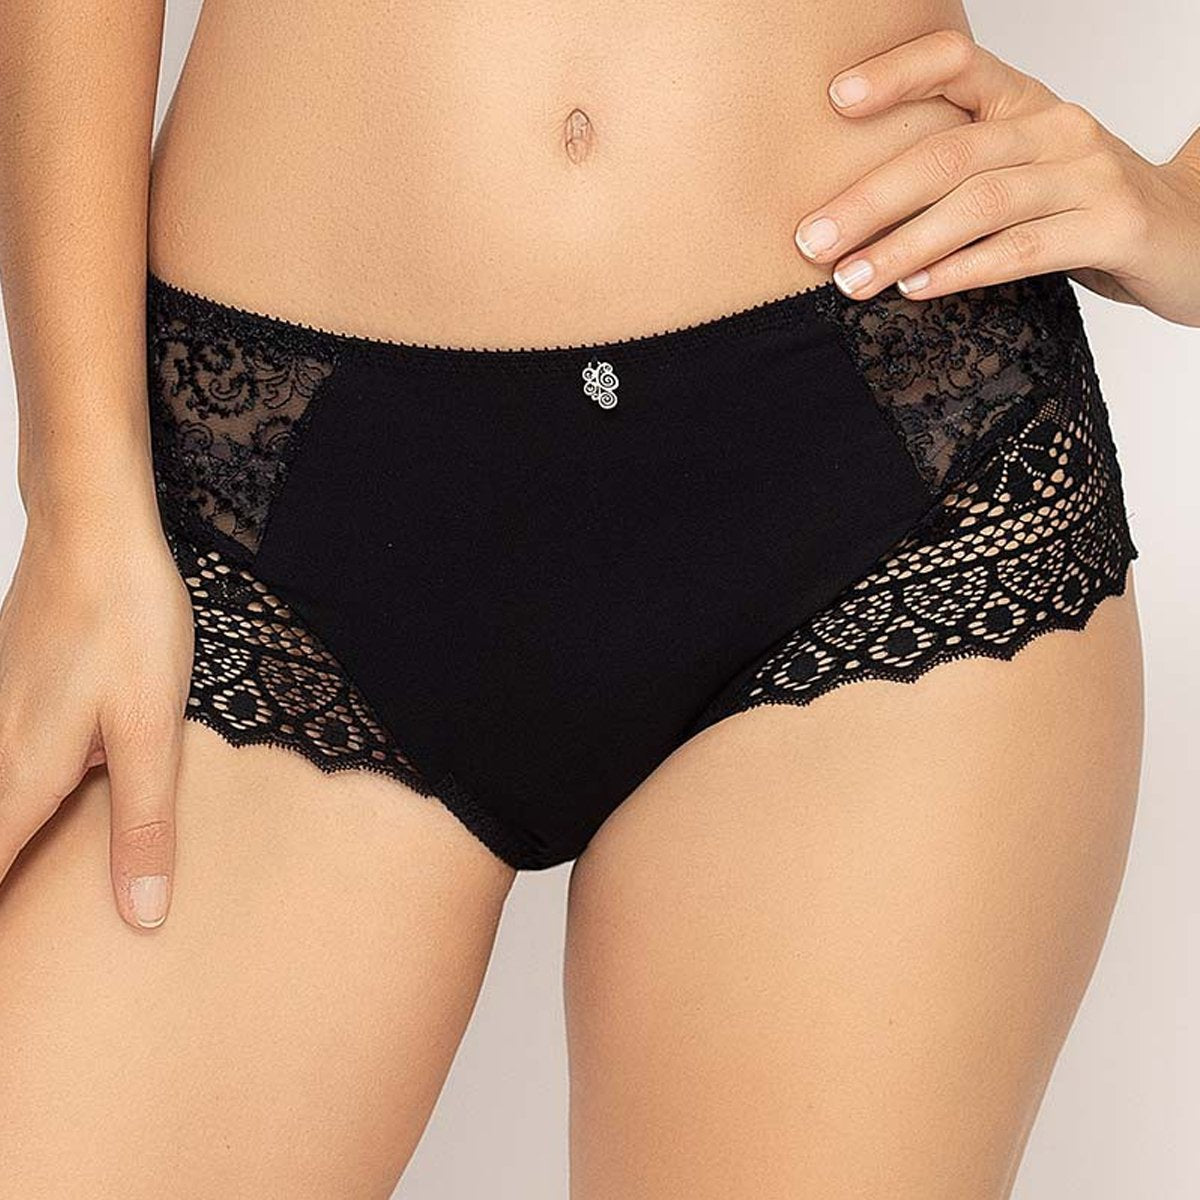 Empreinte cassiopee lace brief in black panty french lingerie canada linea intima